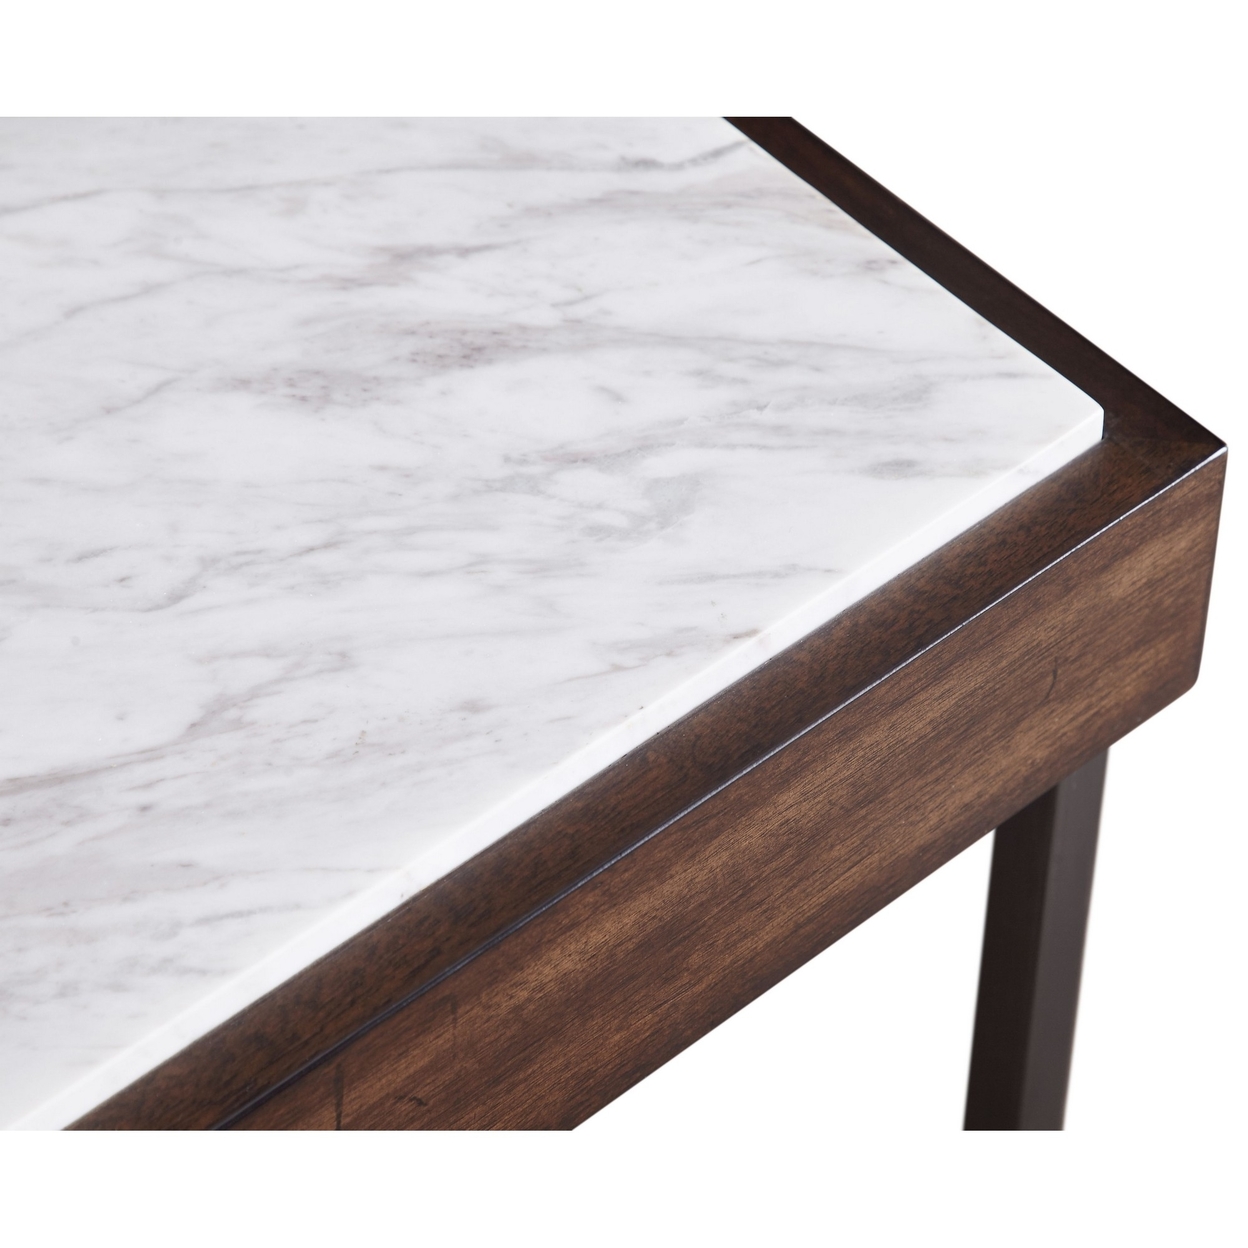 22 Inches Marble Top End Table With Tubular Legs, White And Brown- Saltoro Sherpi